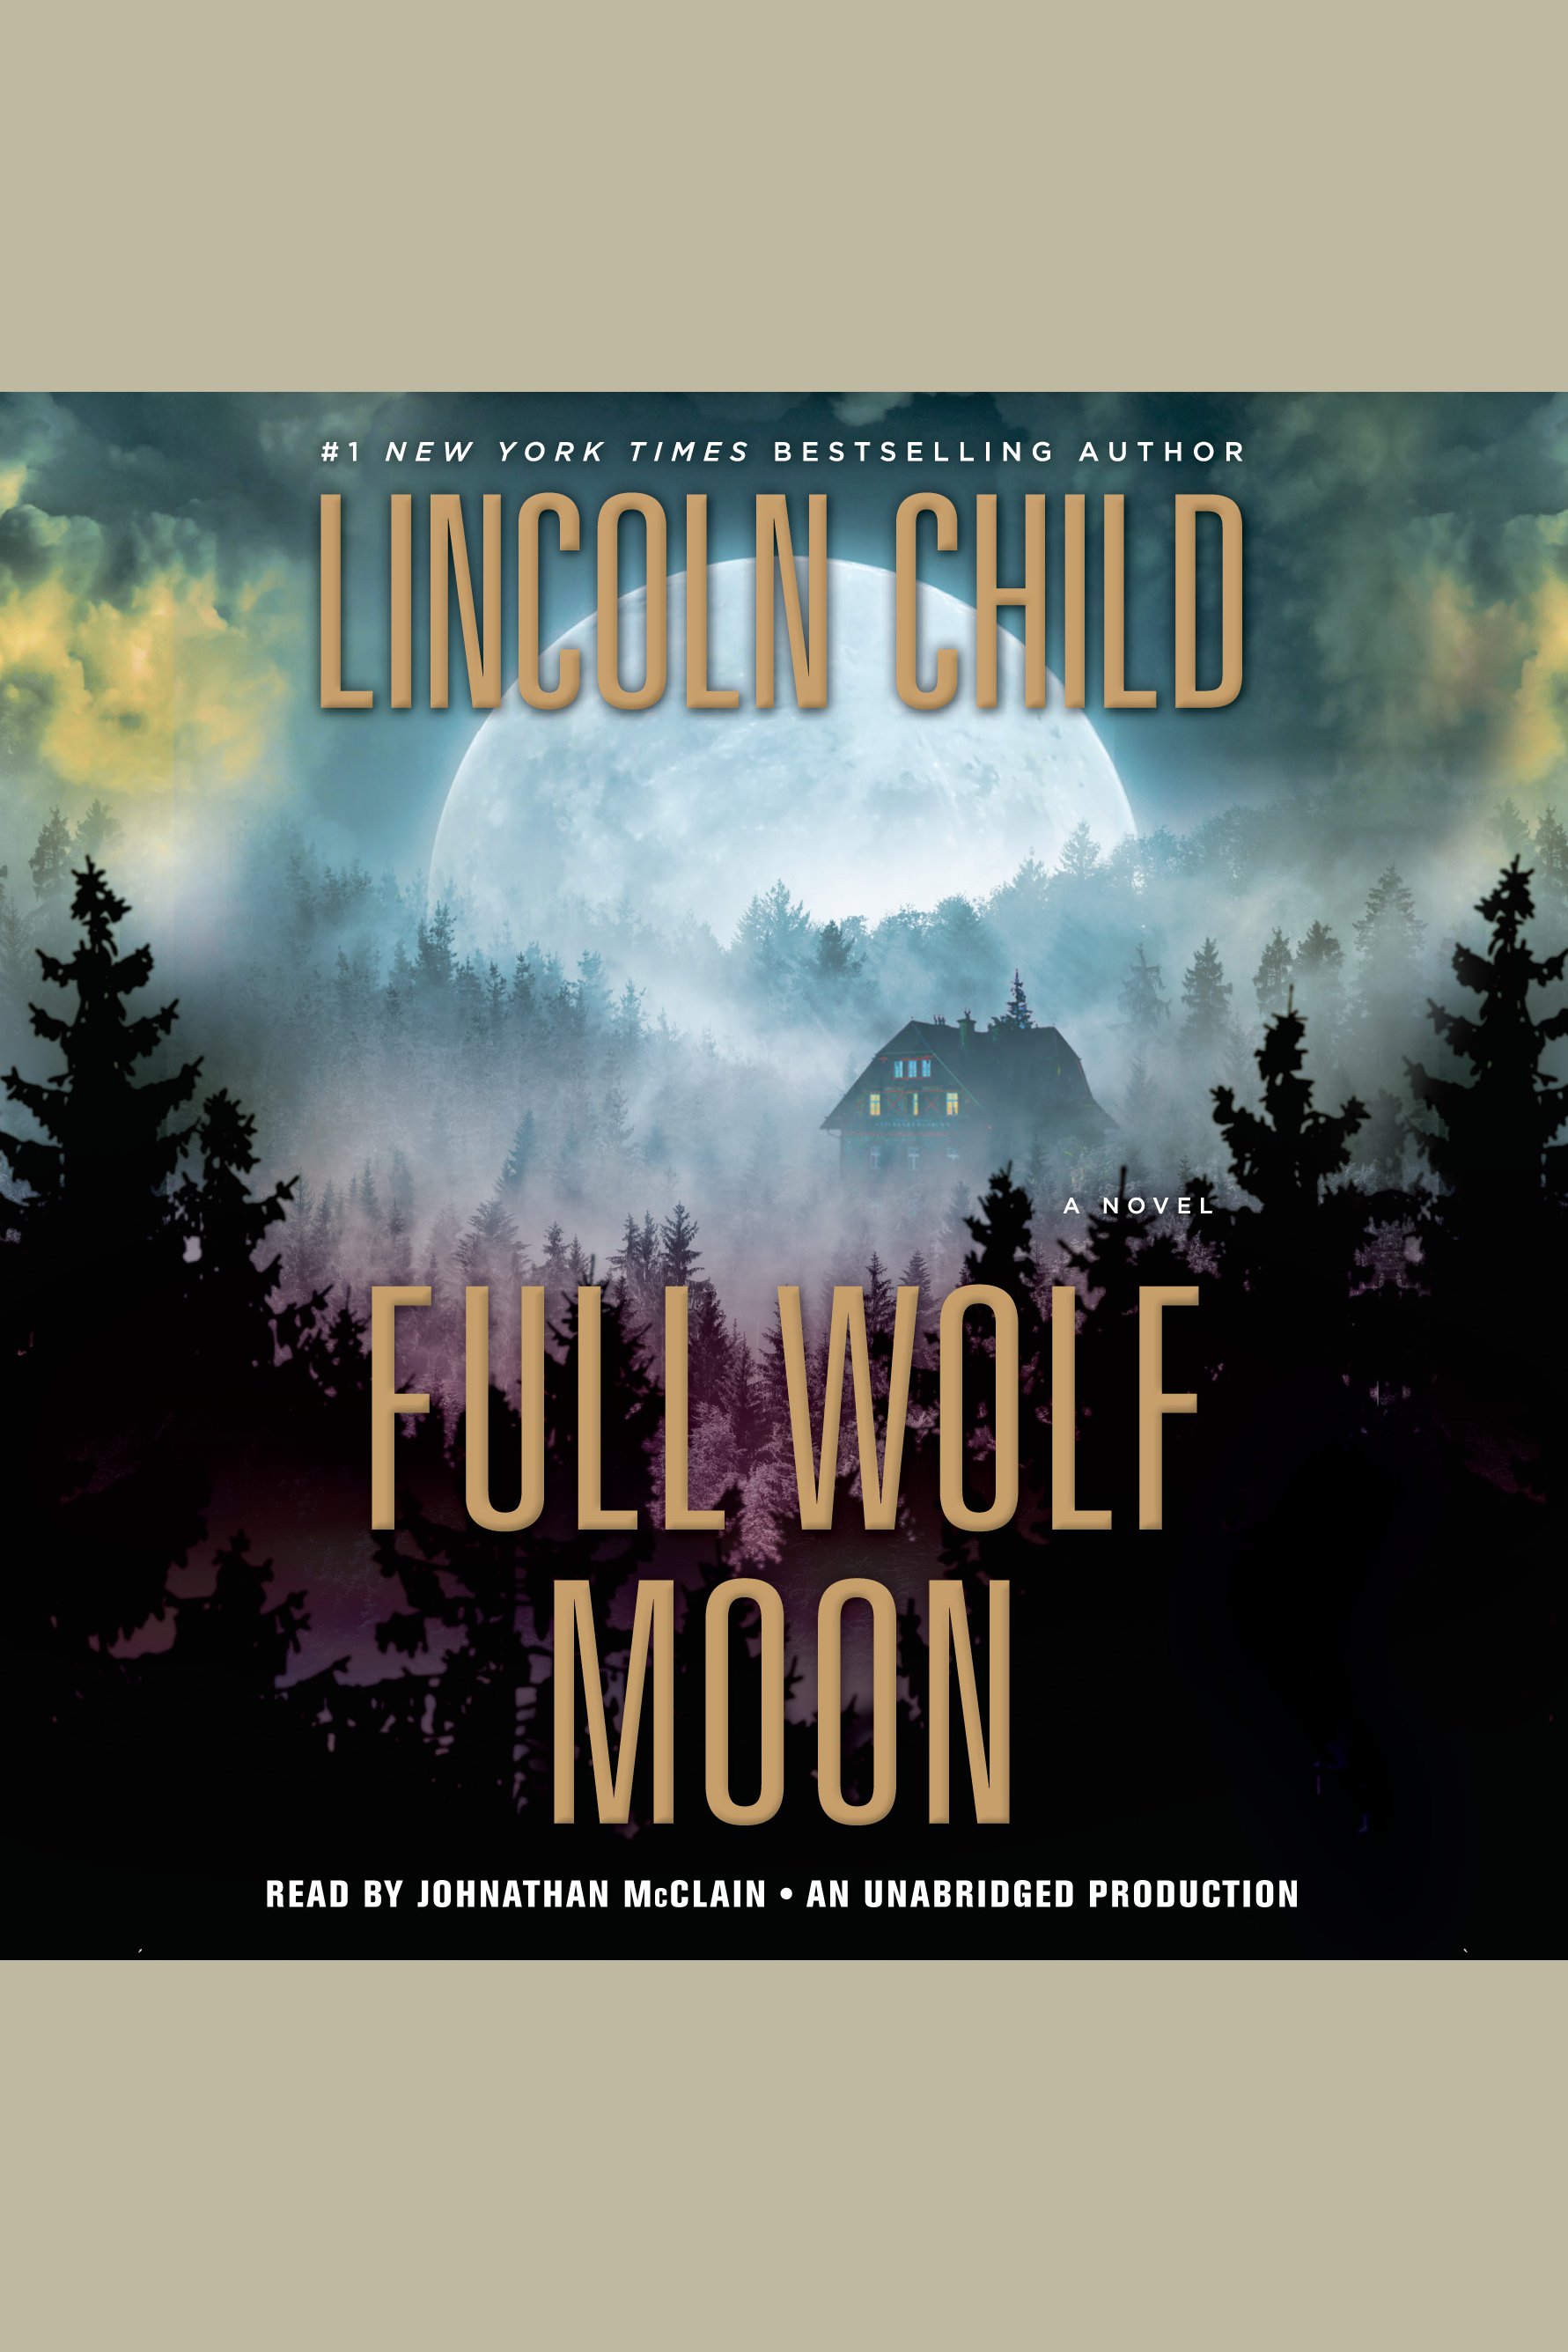 Full wolf moon cover image